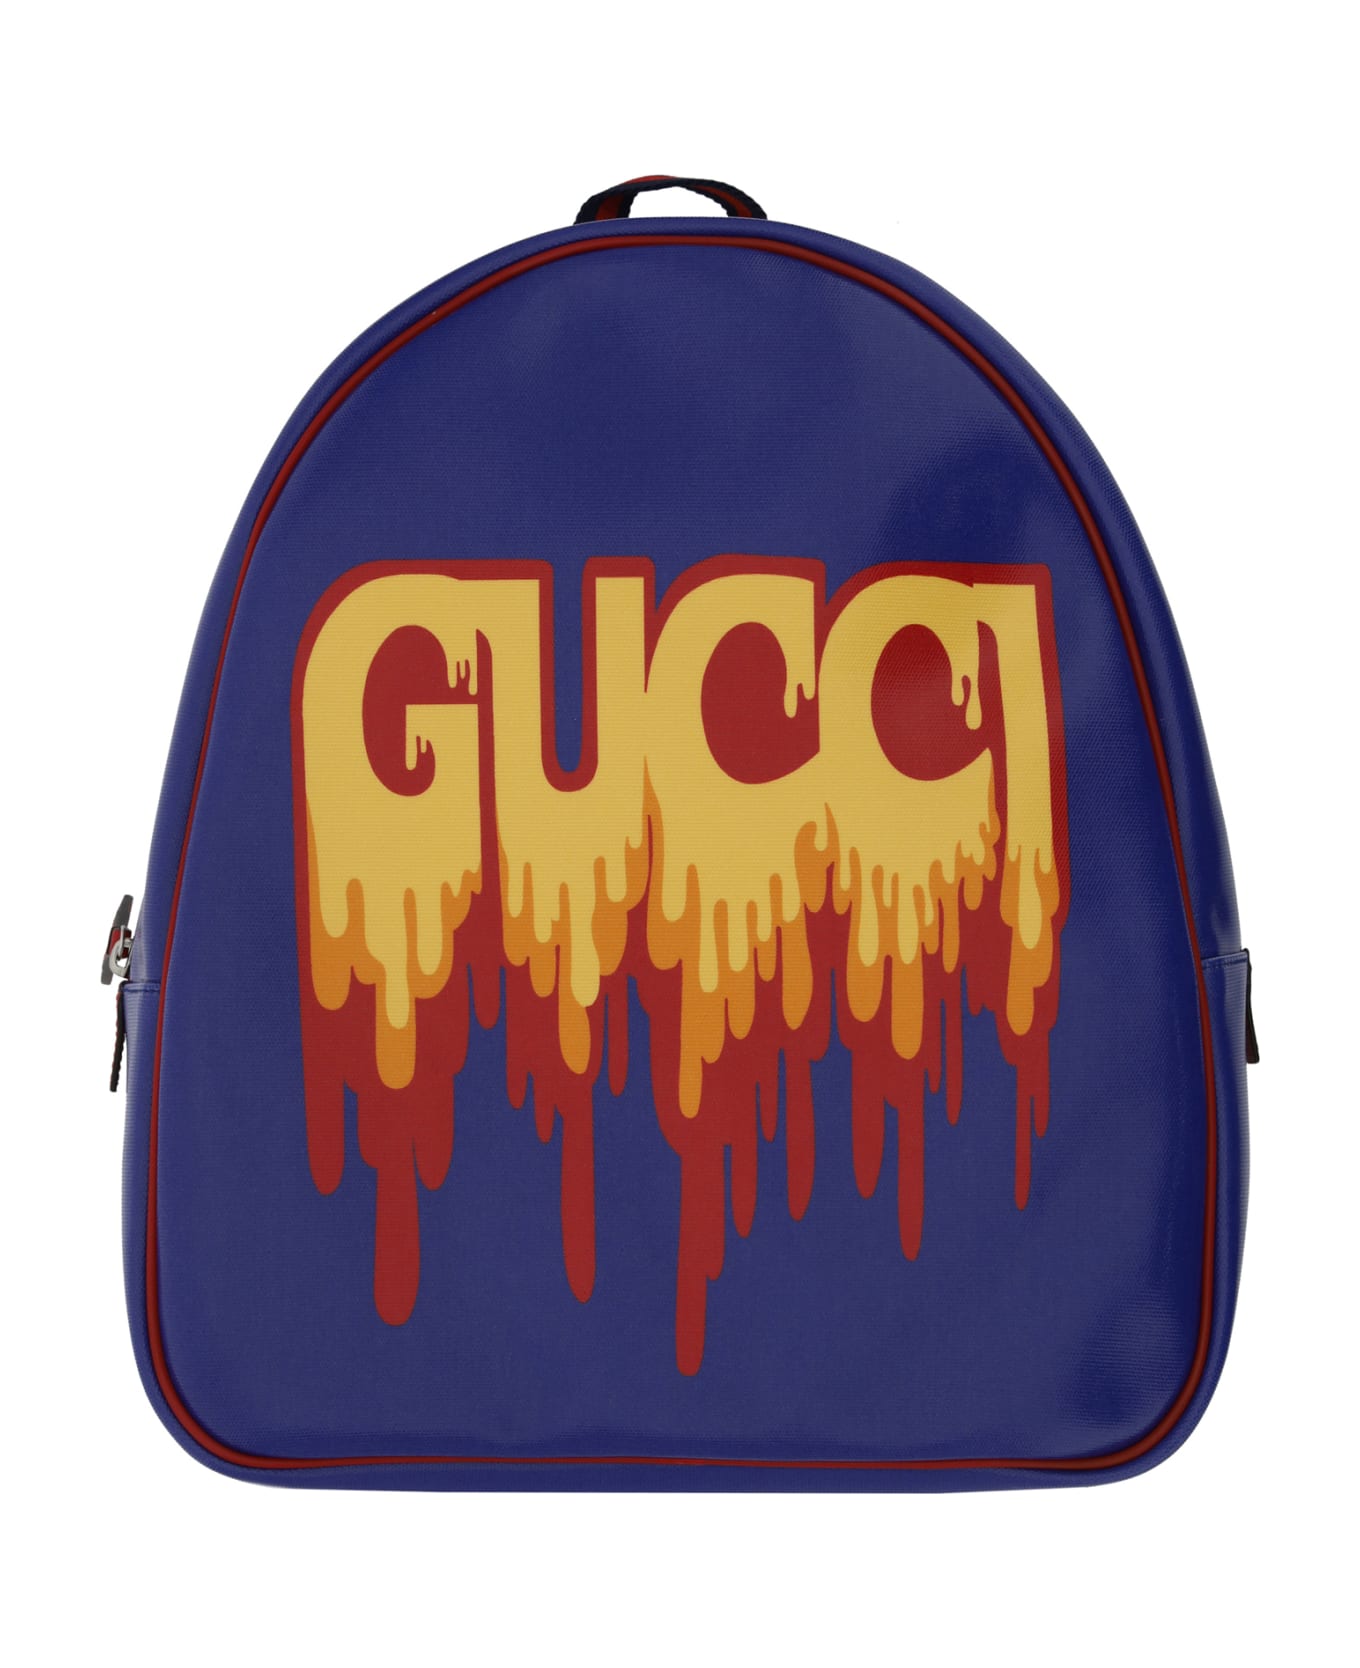 Gucci Malting Backpack For Girl - MultiColour